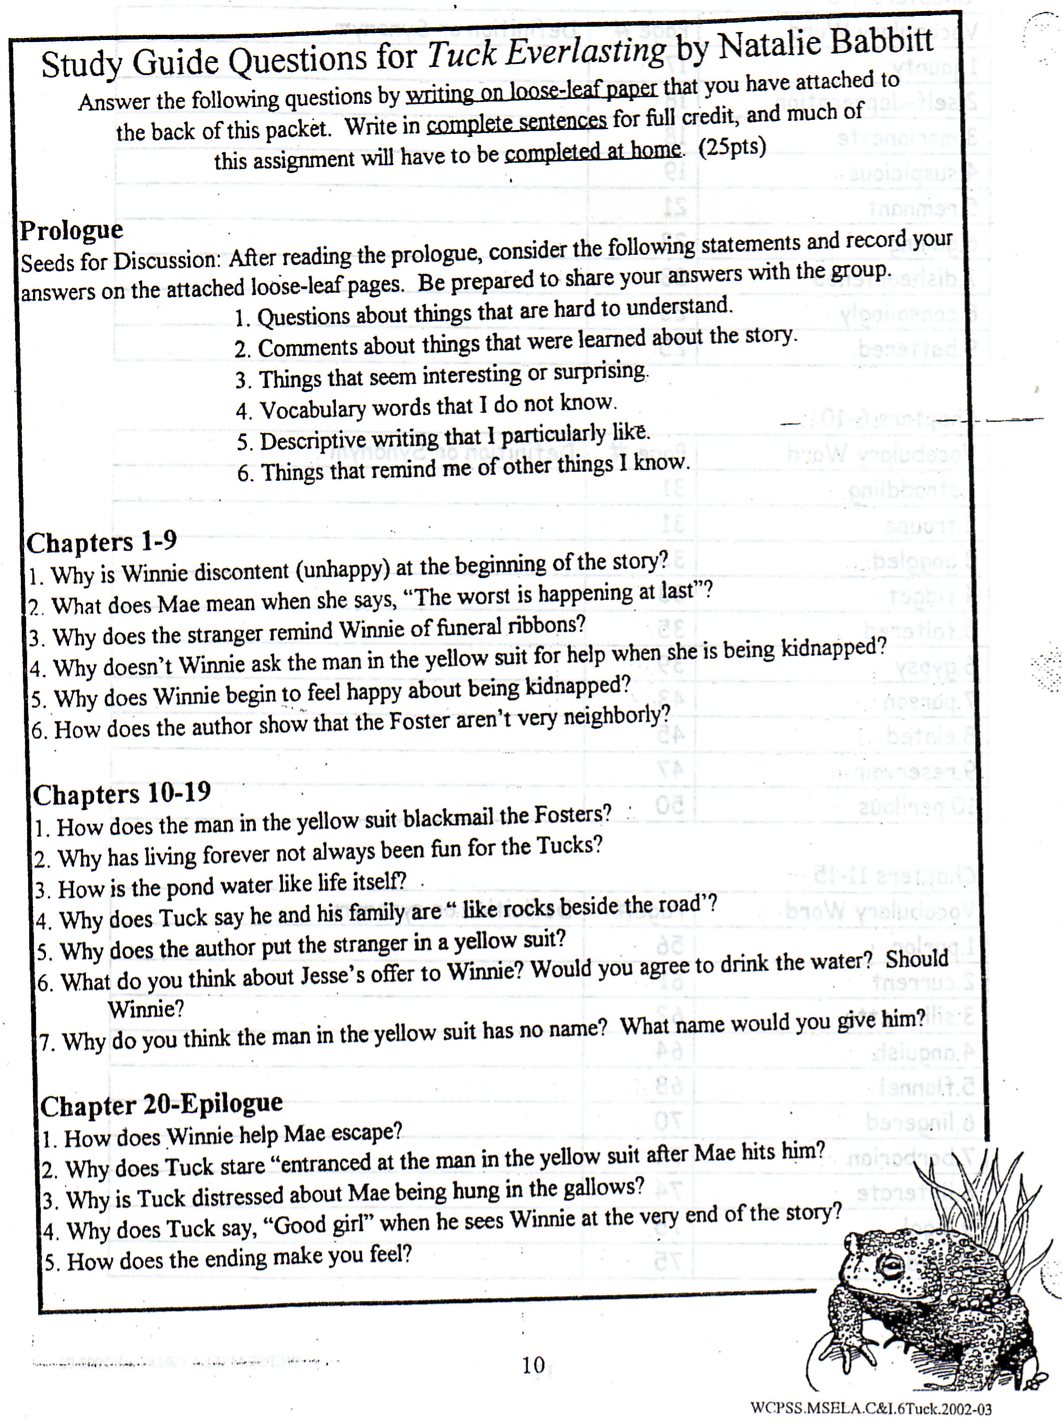 Essay questions for tuck everlasting